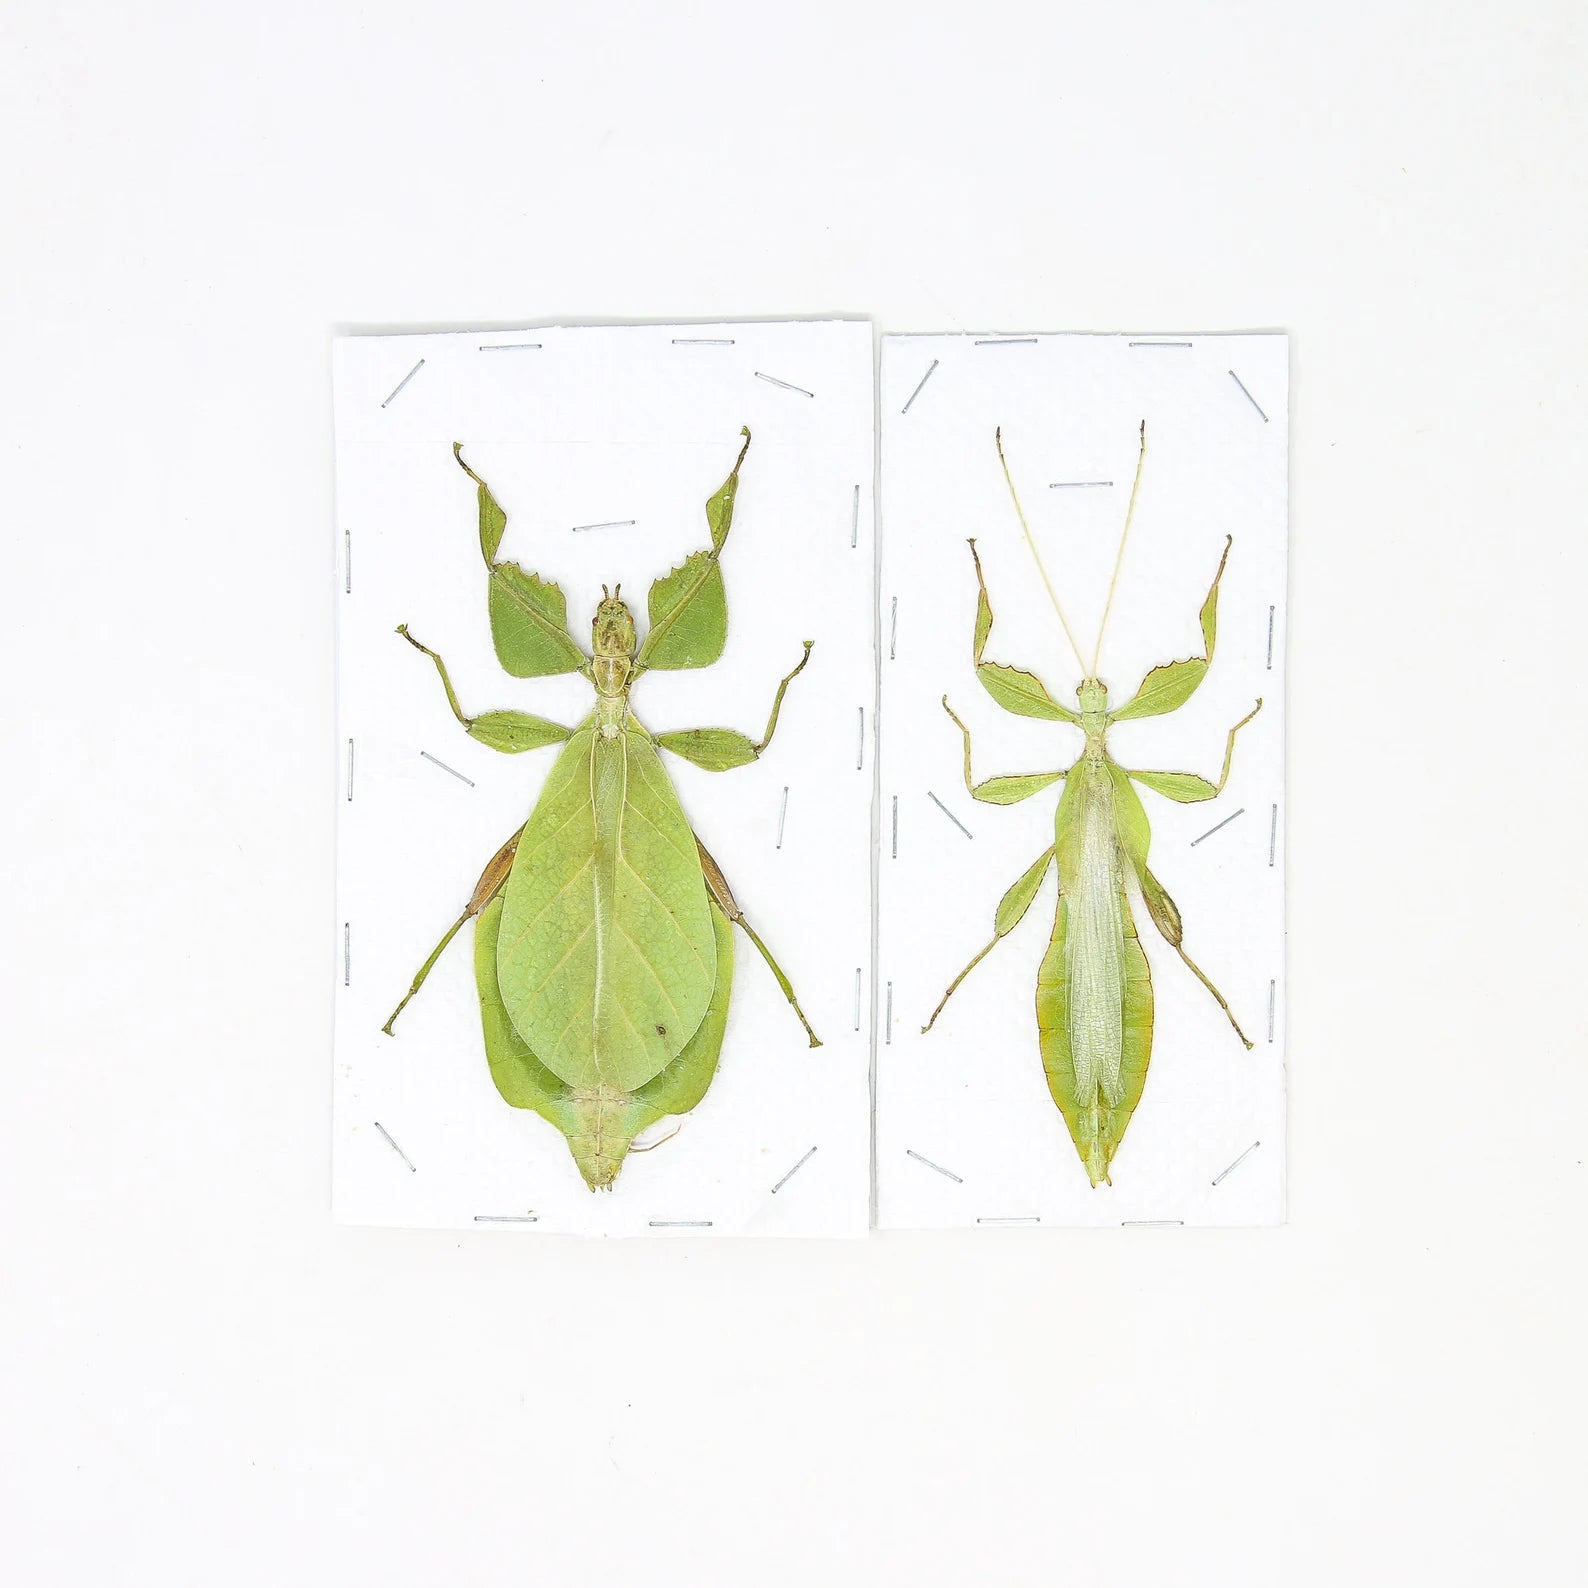 PAIR (2) Giant Leaf Insects, Phyllium celebicum, Unmounted Spread Phasmids, Insect Specimens for Collecting, Art, Entomology